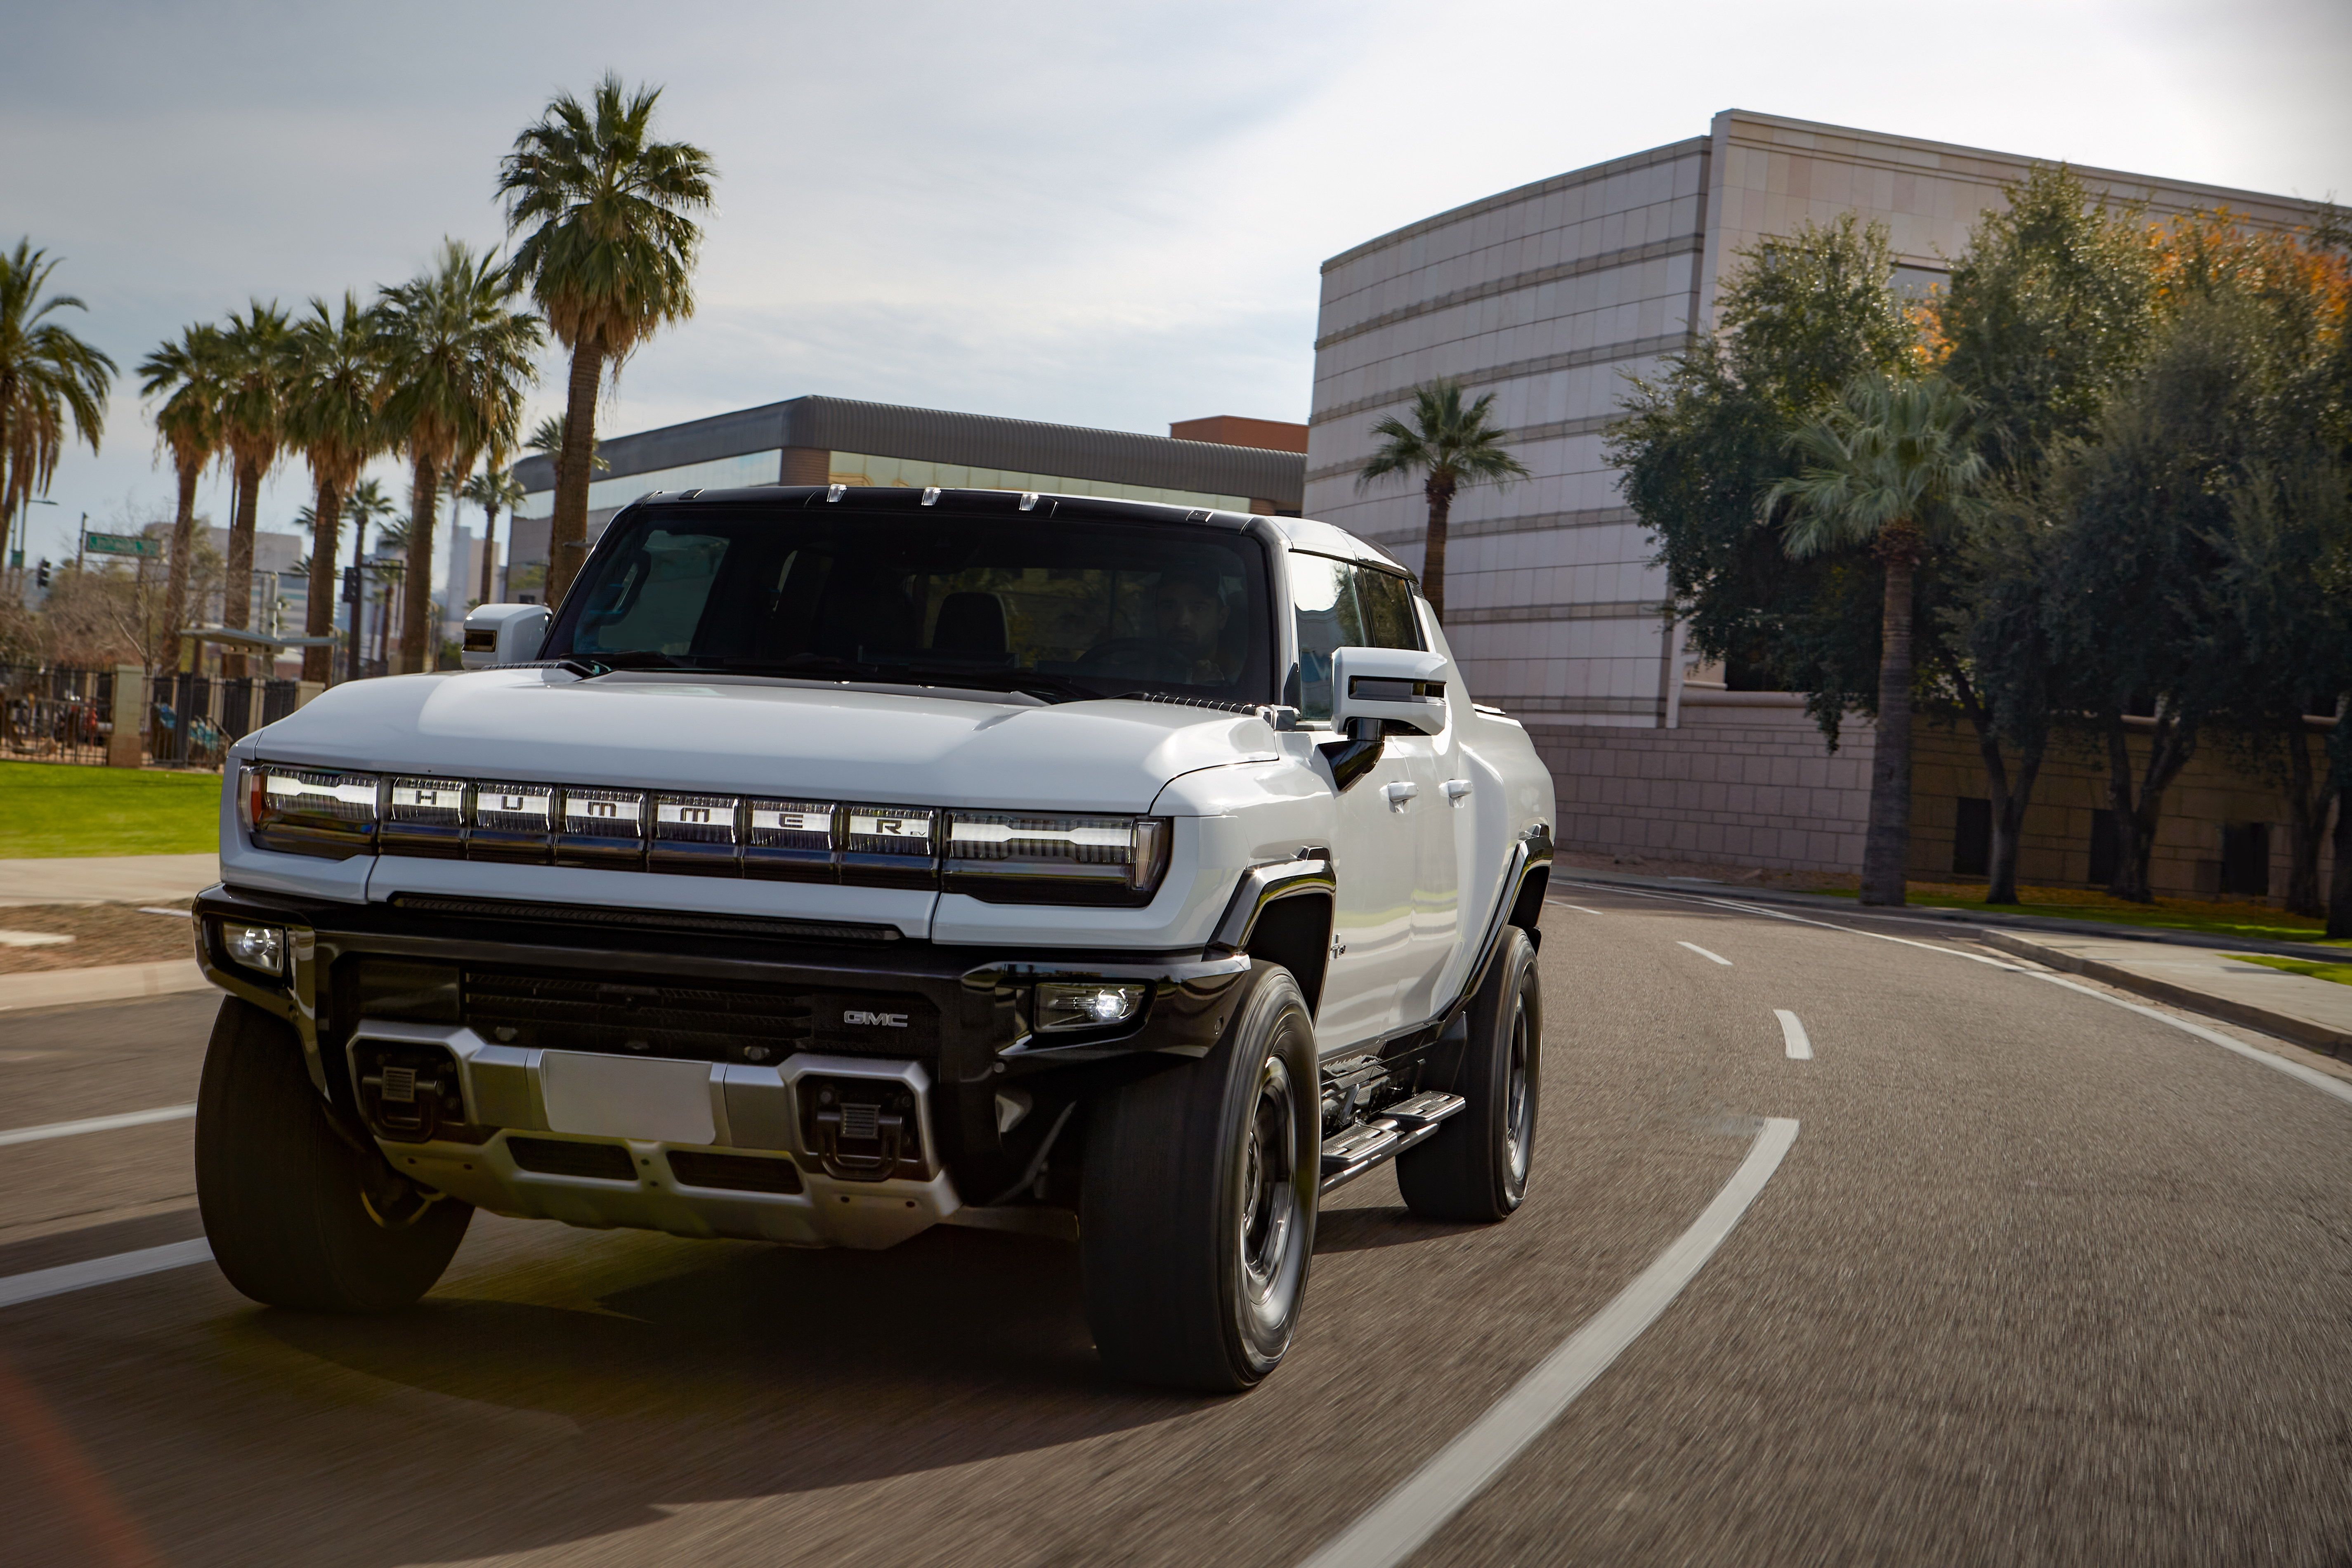 Front shot of the 2022 Hummer EV Pickup Truck on the road